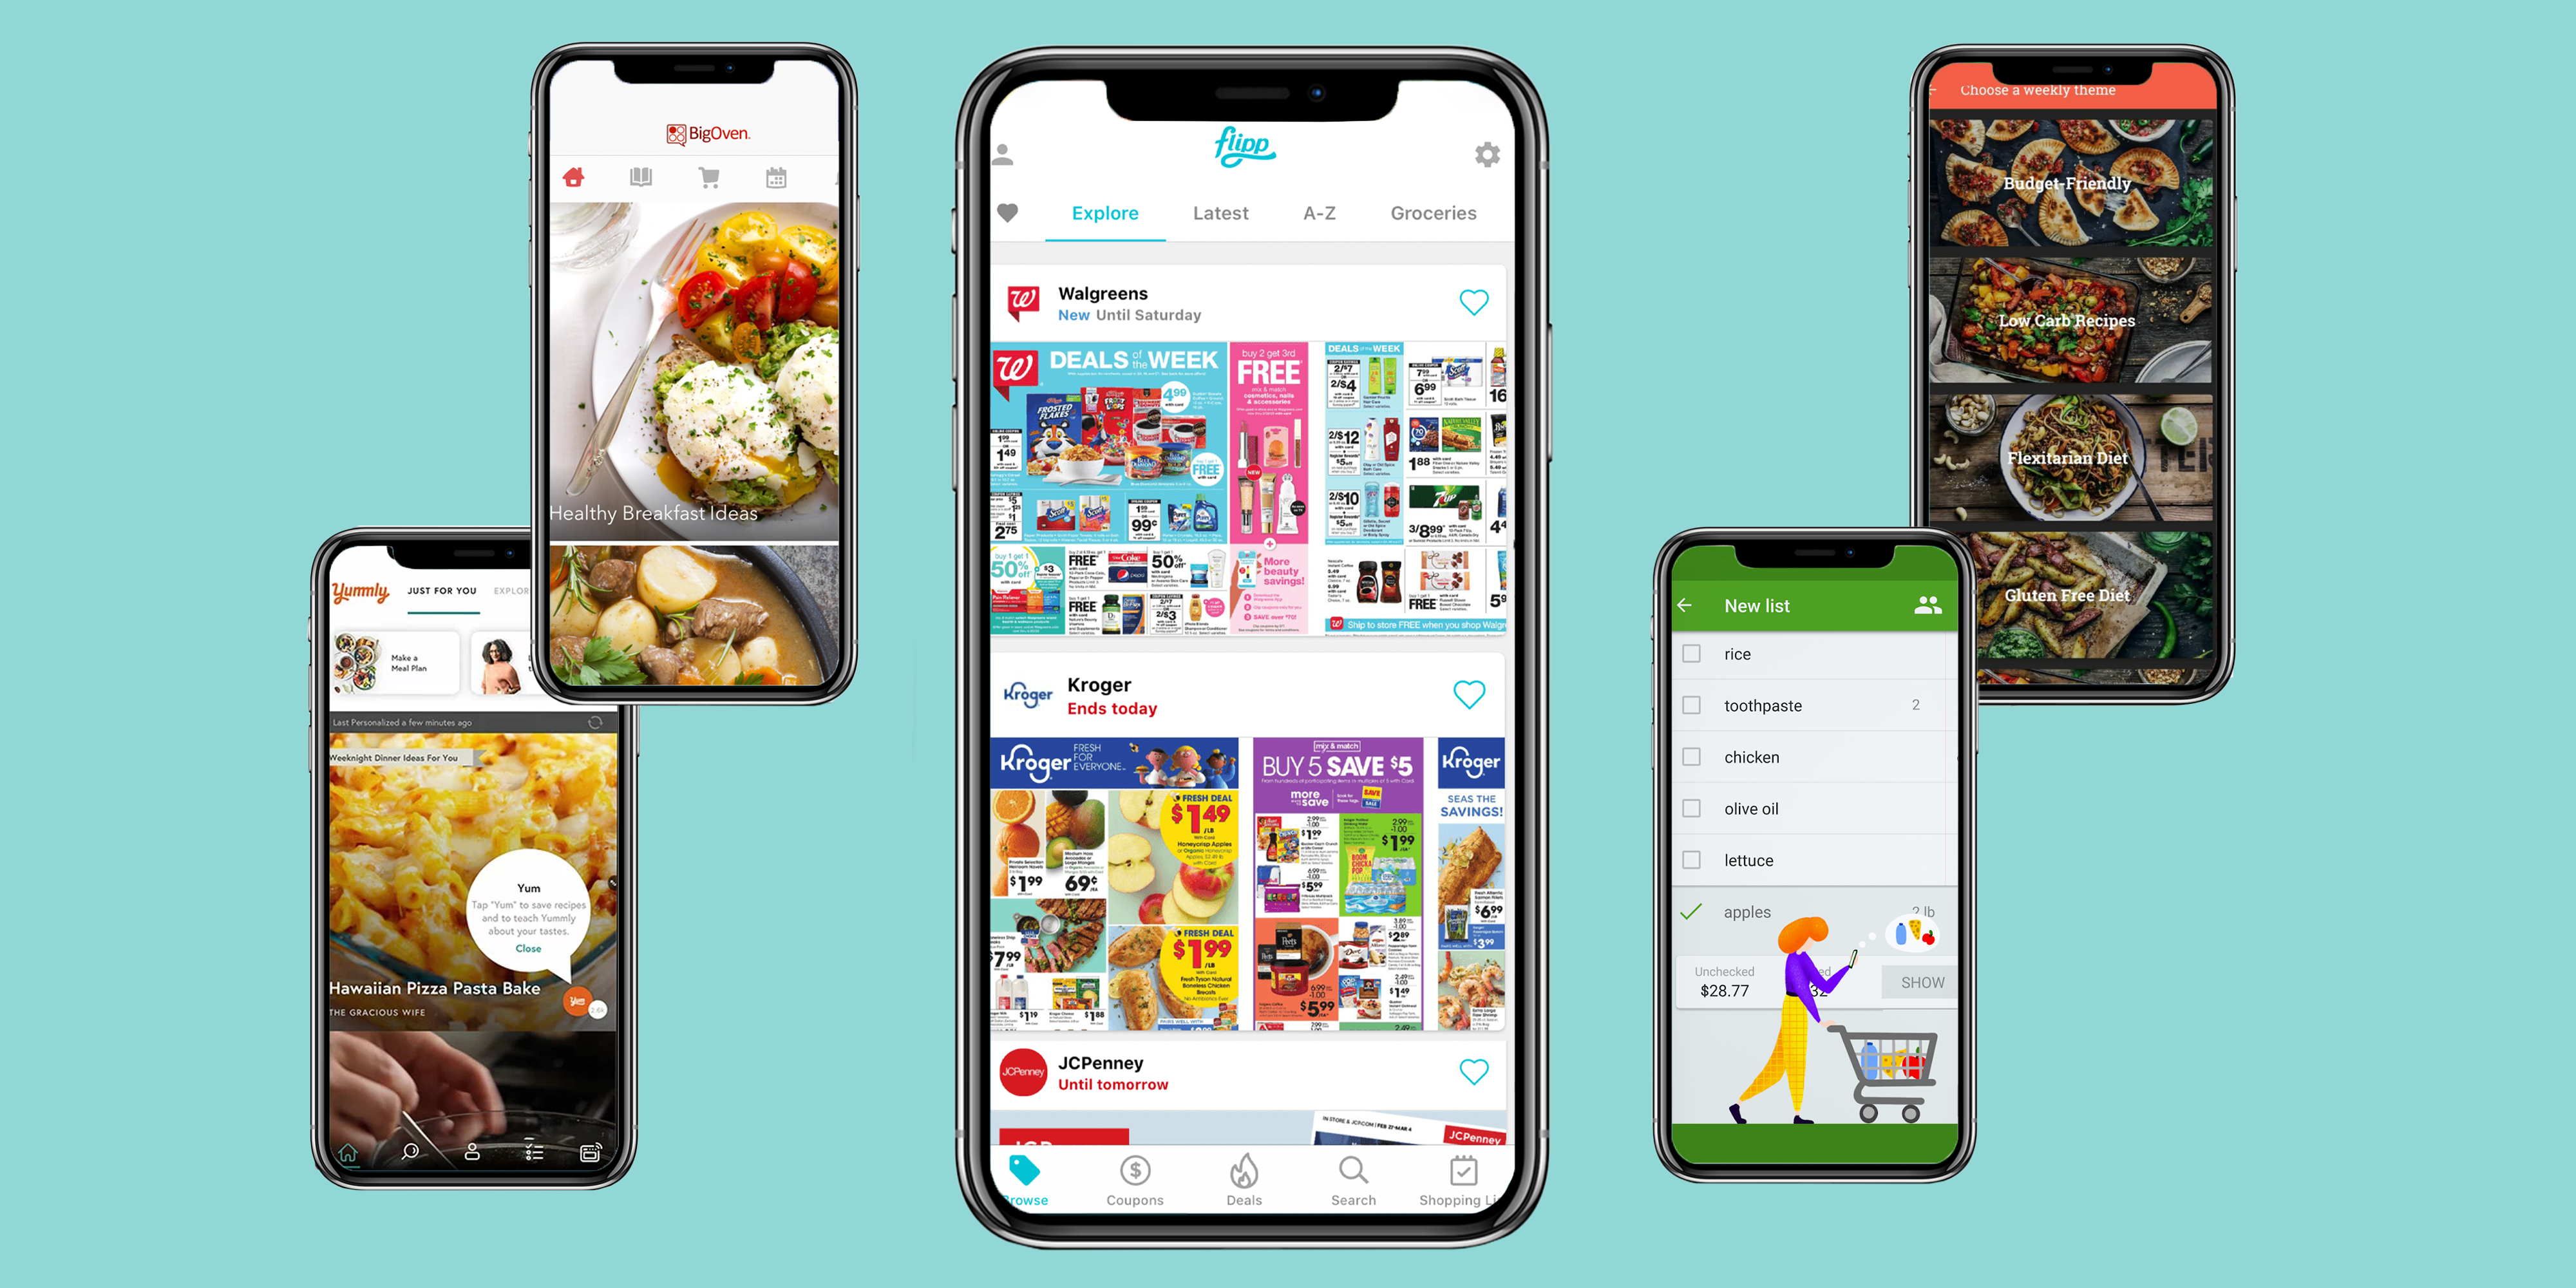 10 Best Grocery Shopping List Apps of 2023